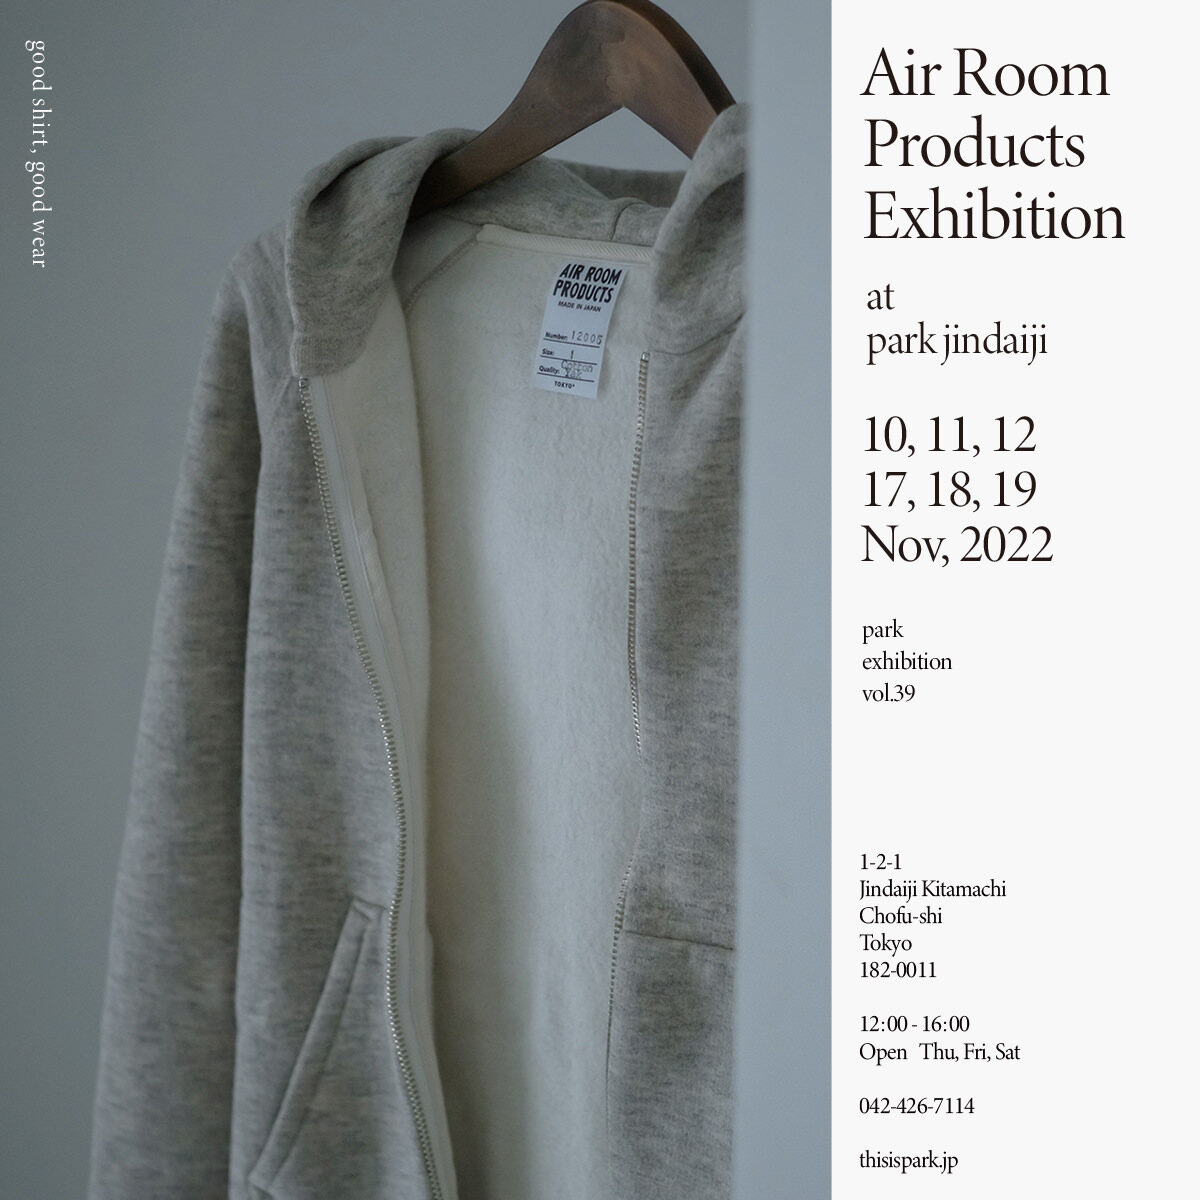 【Air Room Products Exhibition】開催のお知らせ